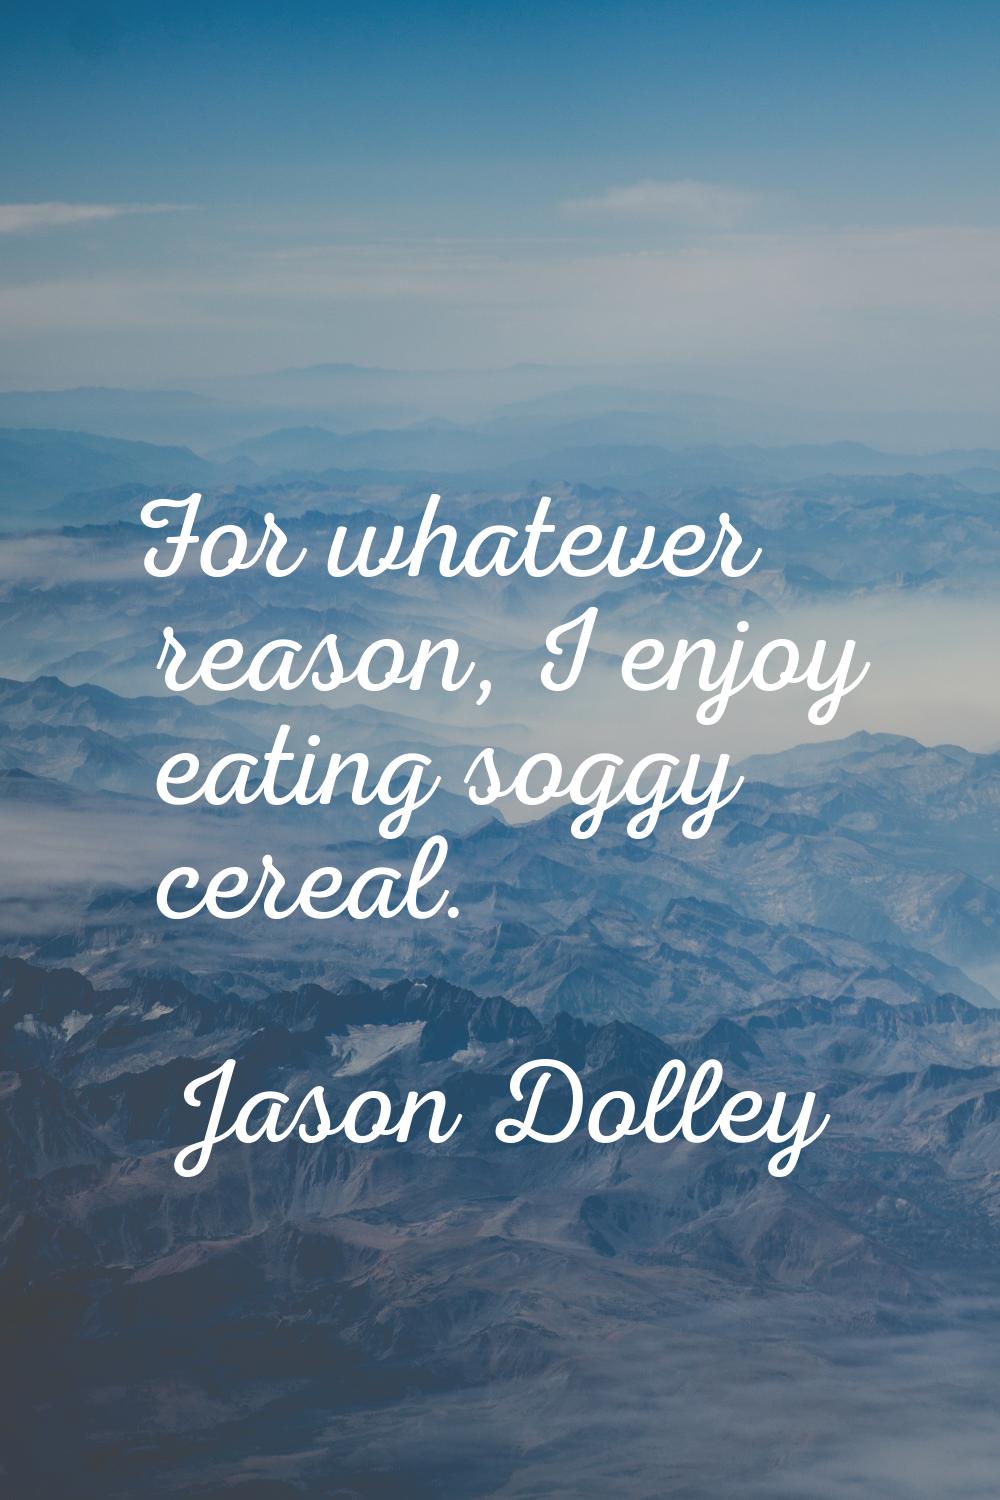 For whatever reason, I enjoy eating soggy cereal.